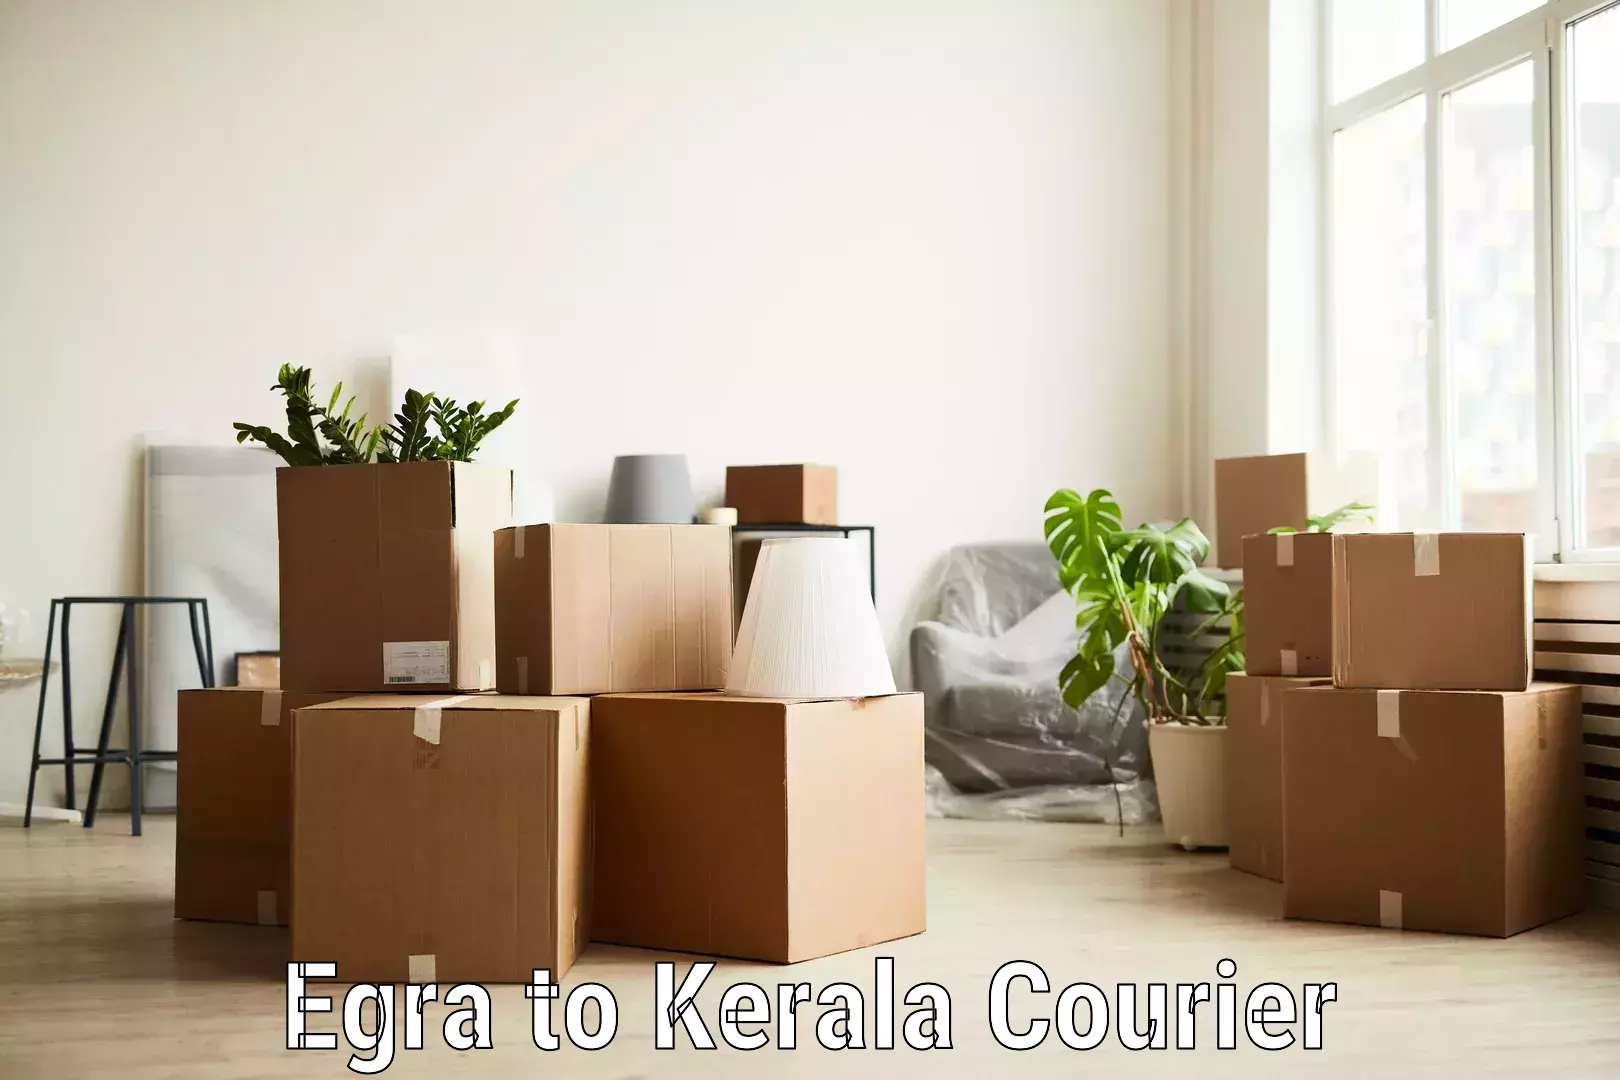 Tailored freight services in Egra to Kerala